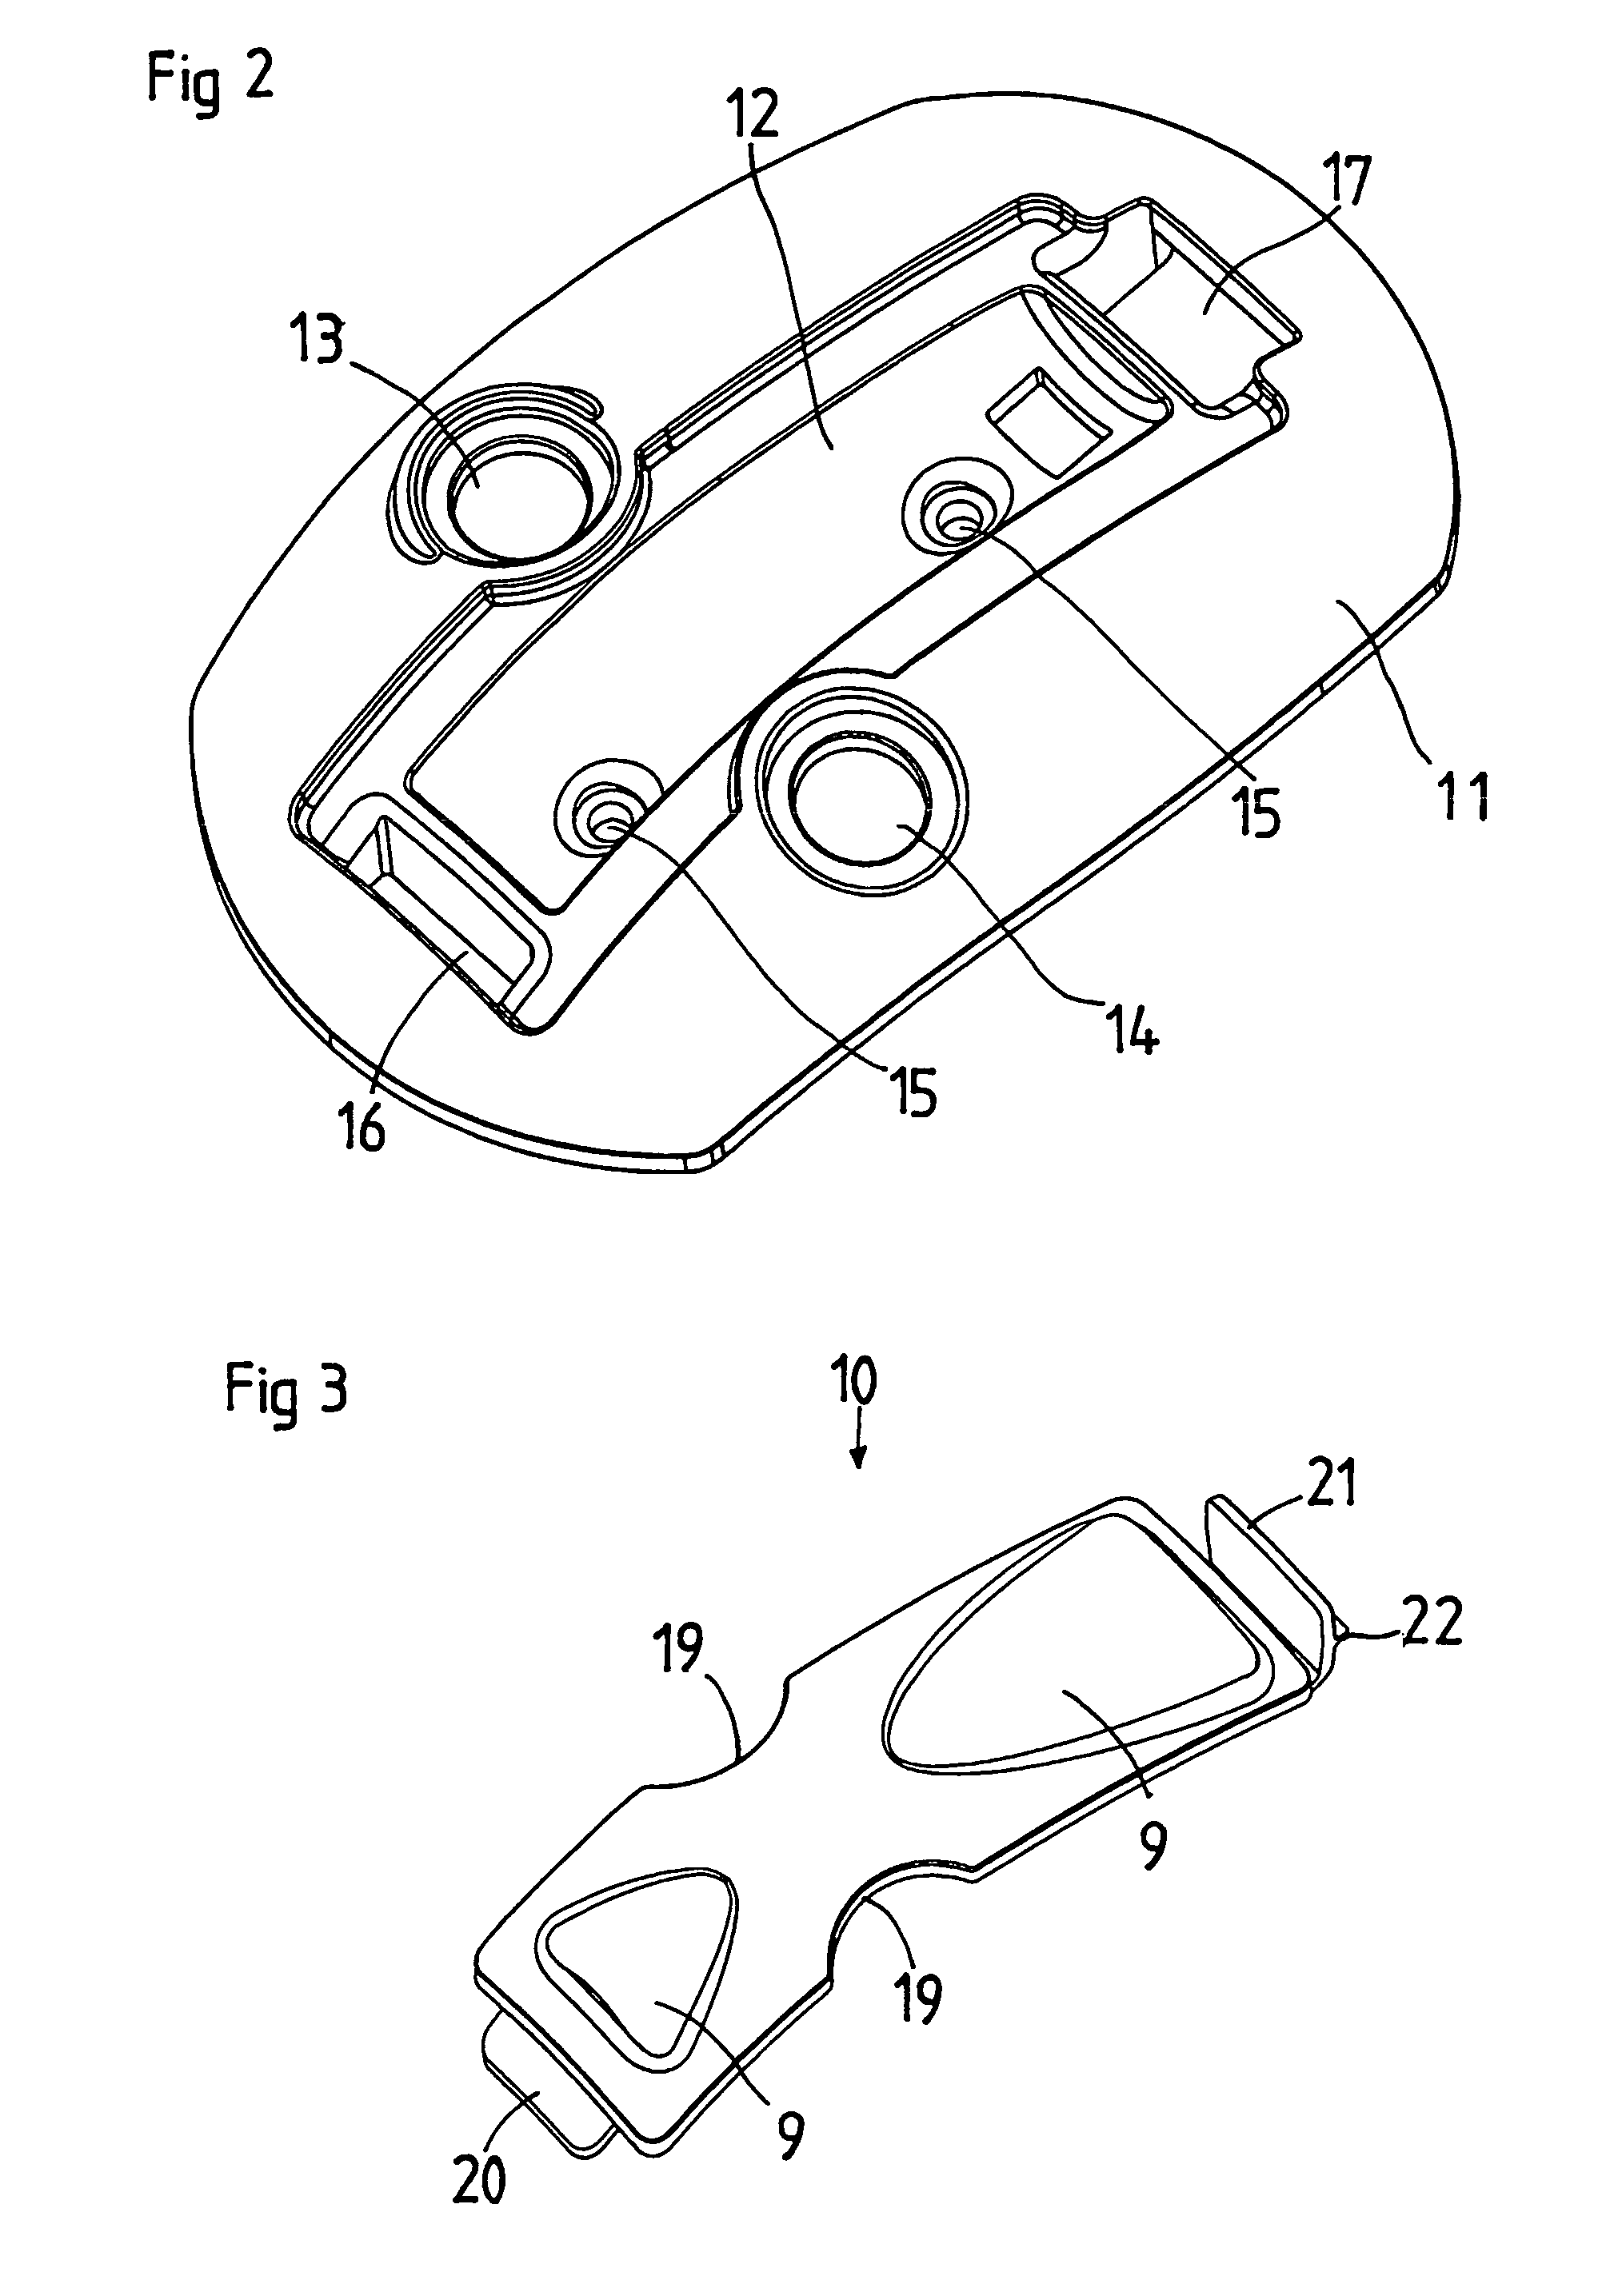 Hearing protector with removable microphone, amplifier, and loudspeaker unit